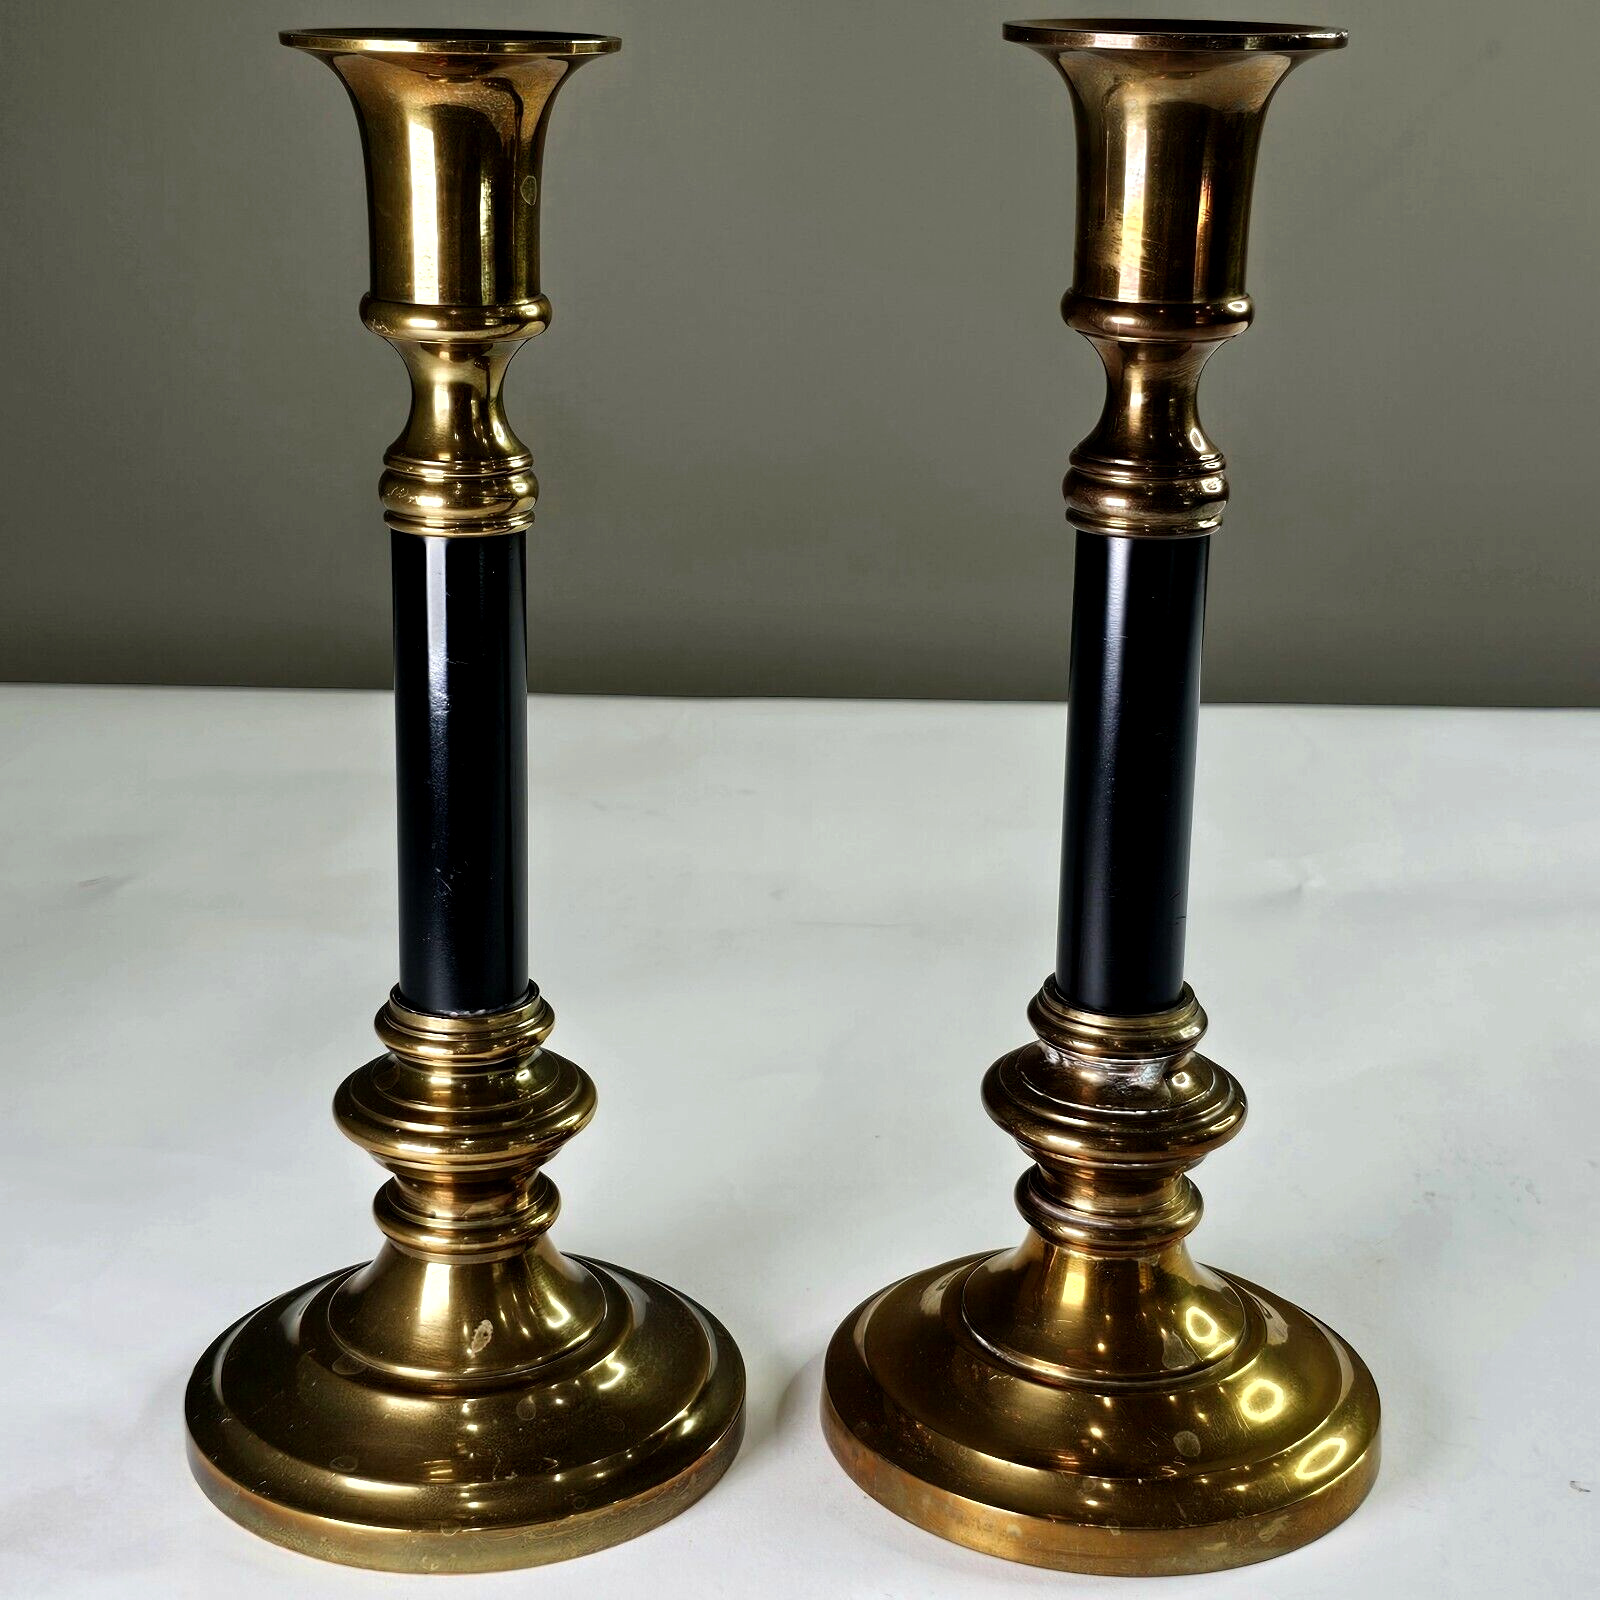 Antique  Brass & Black Candlesticks Candle Holders 11in Tall Heavy Made In Hong